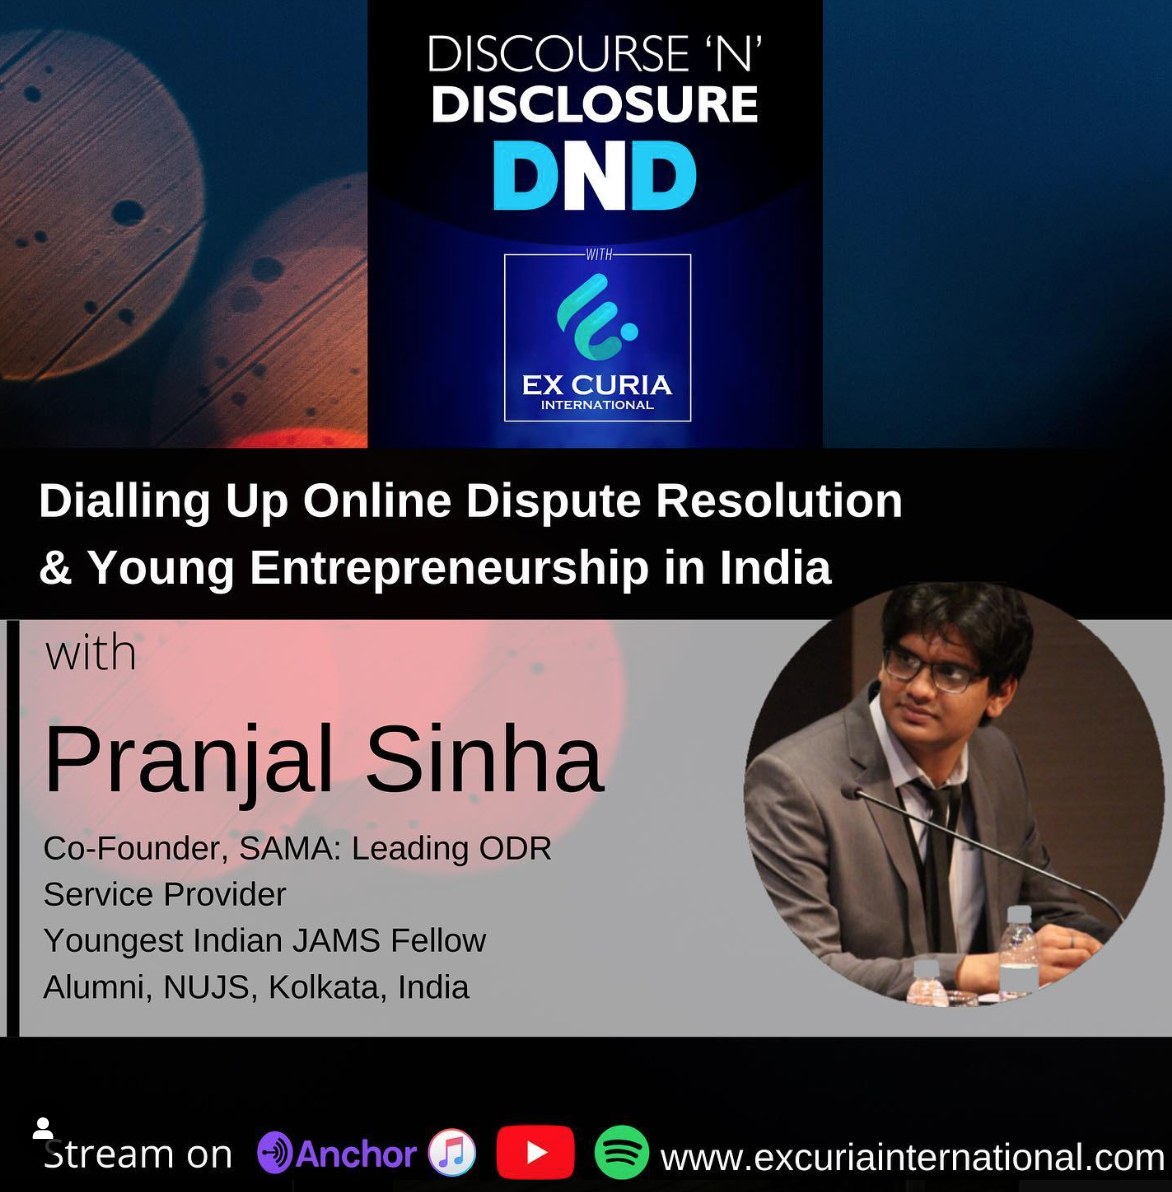 Dialling Up Online Dispute Resolution & Young Entrepreneurship in India: with Pranjal Sinha of SAMA